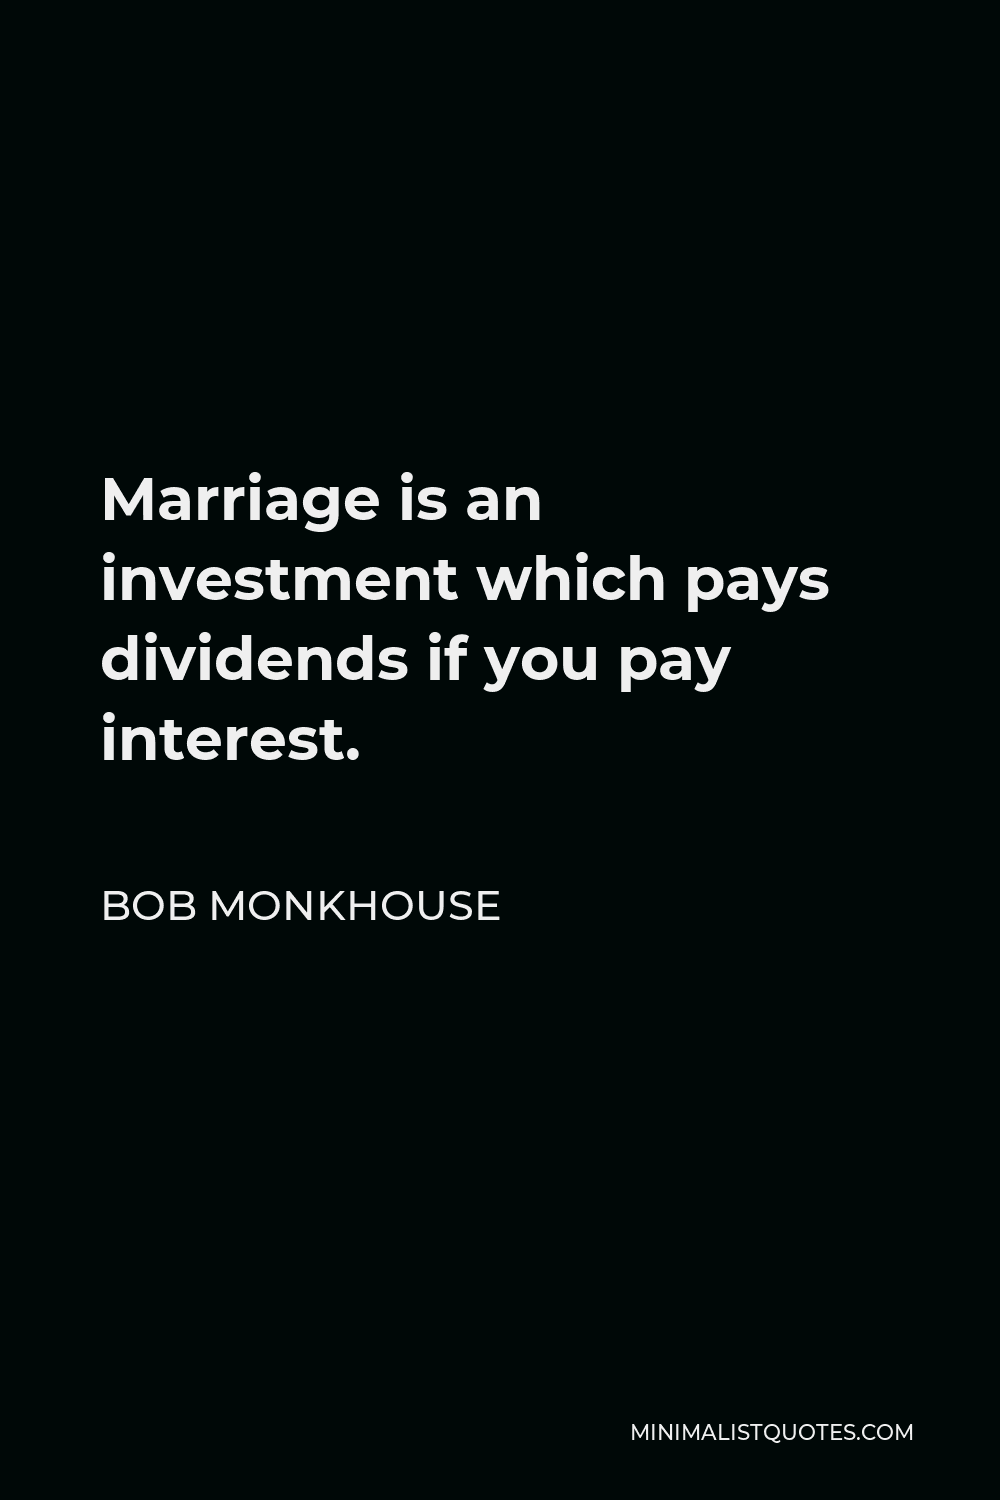 Bob Monkhouse Quote - Marriage is an investment which pays dividends if you pay interest.